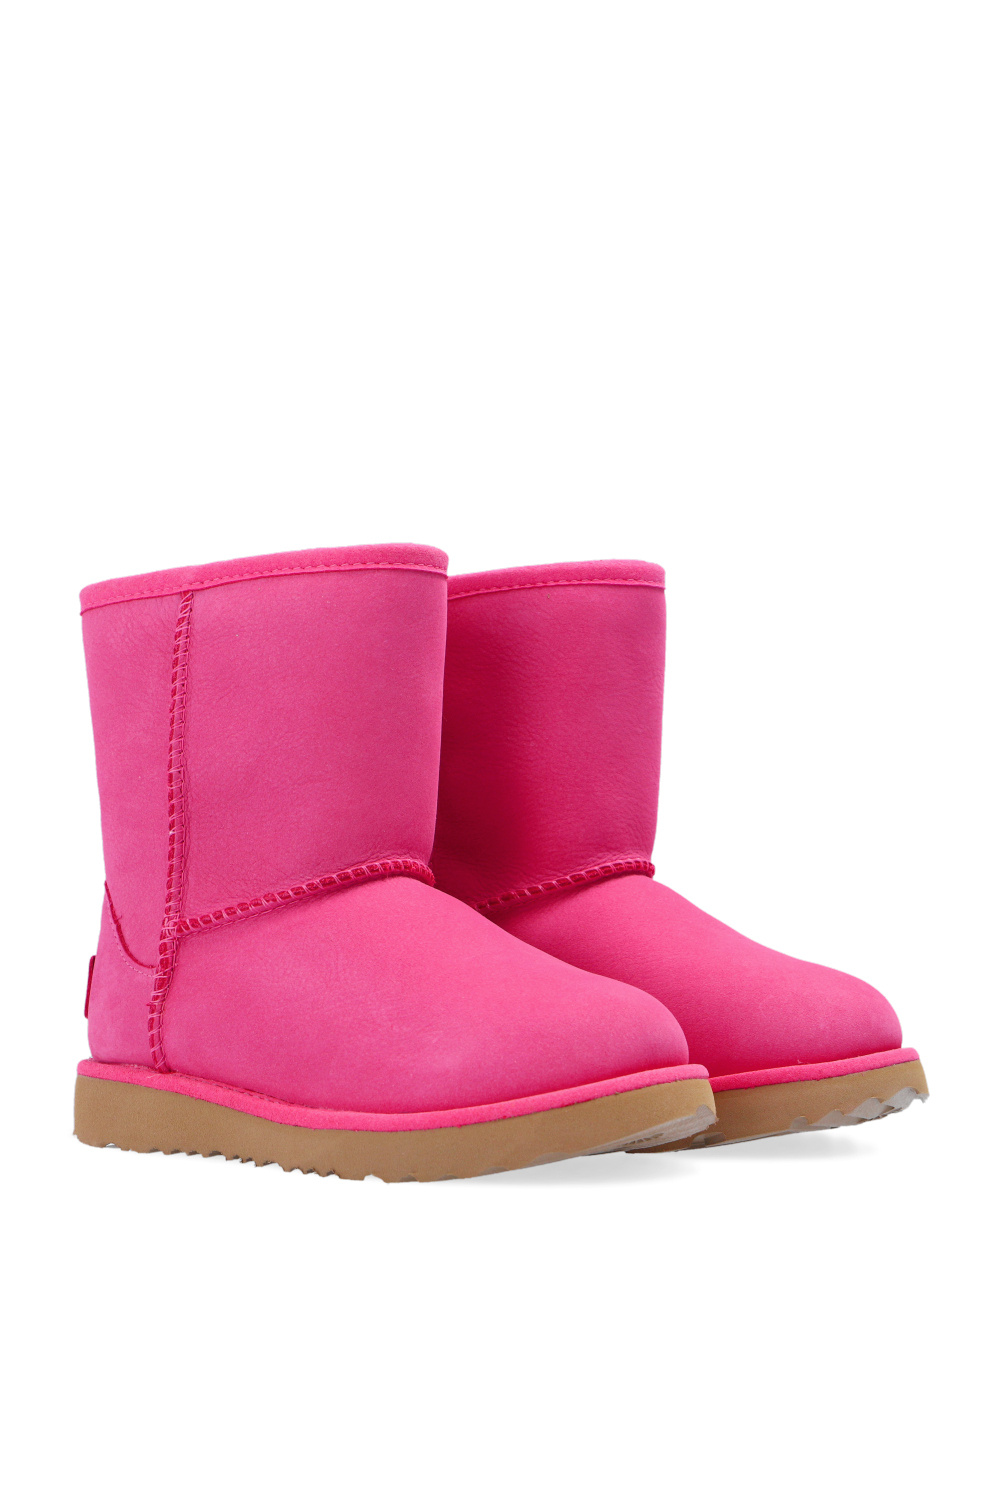 ugg MGOR Kids ‘Classic Weather Short’ snow boots